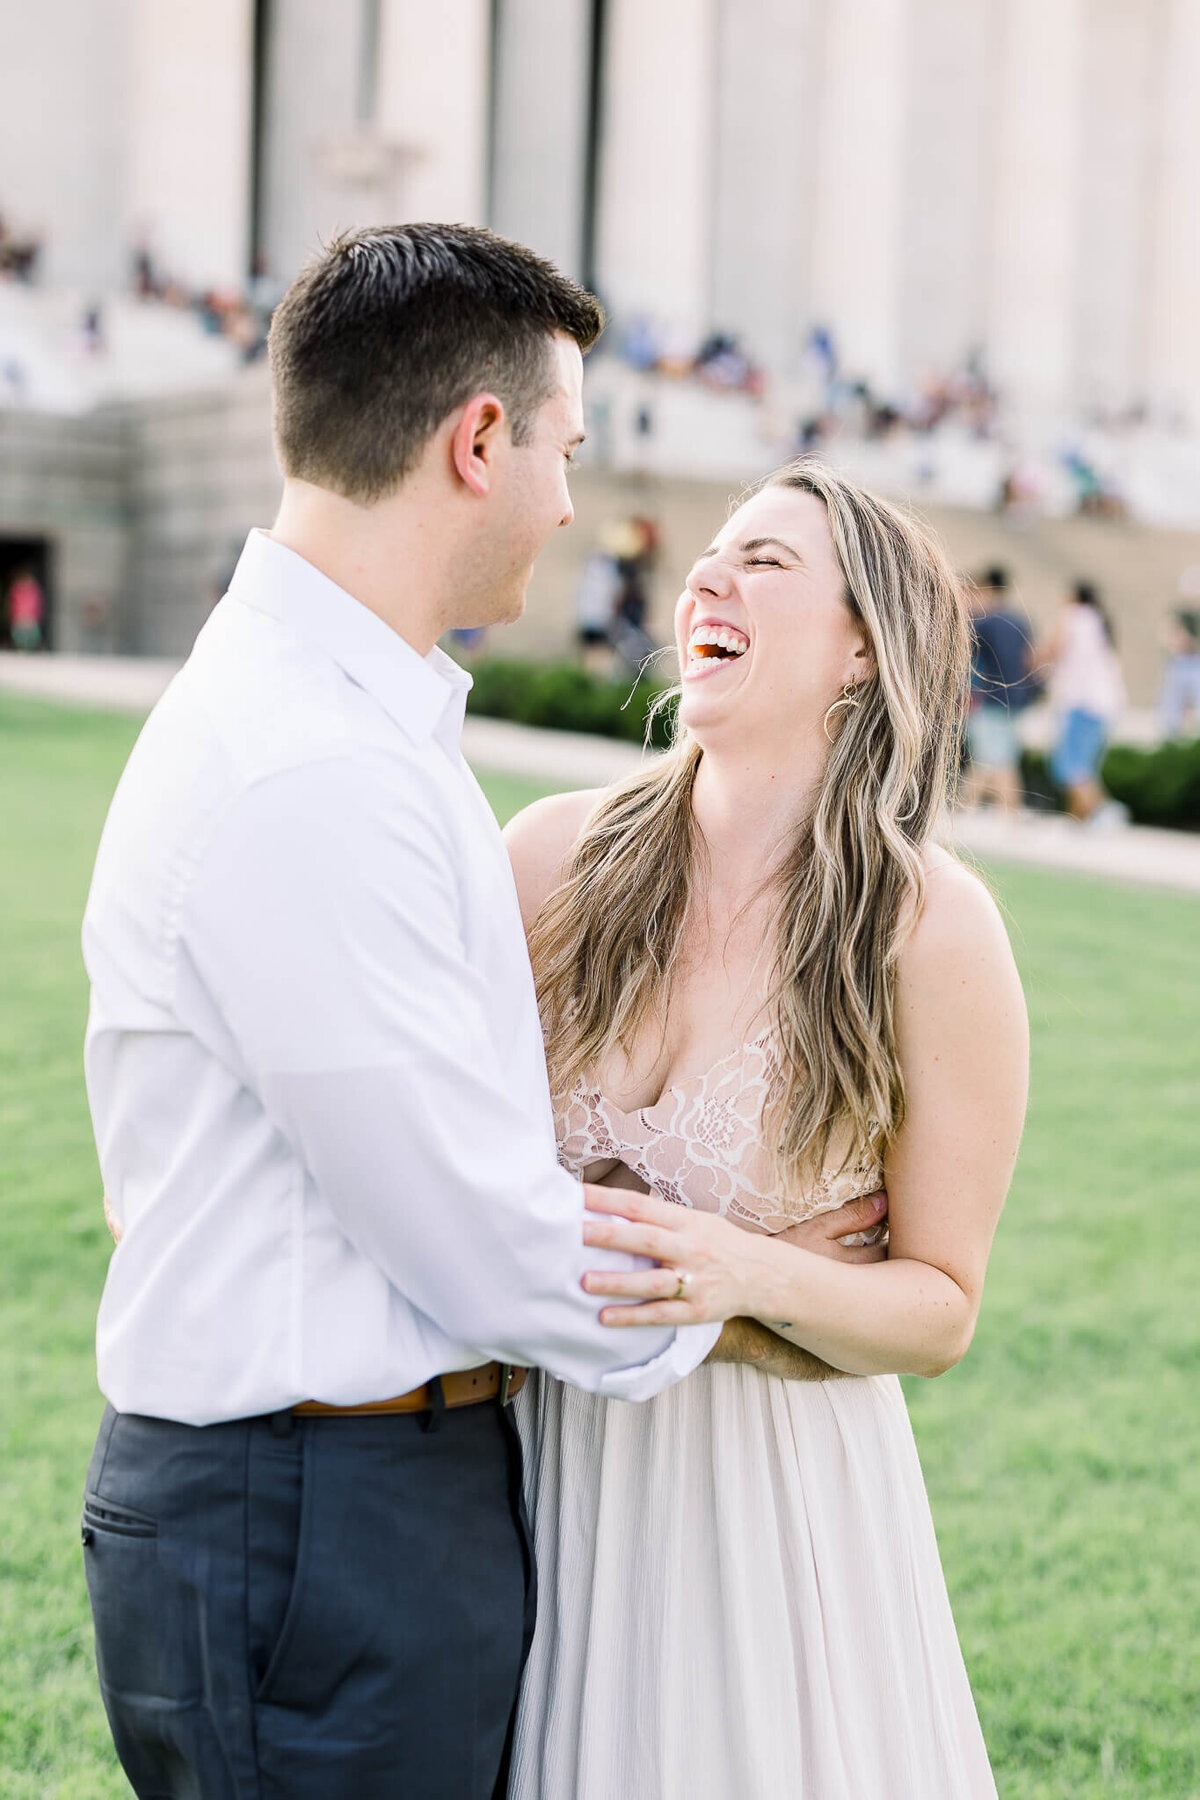 engagement-lincoln-memorial-proposal-photography-washington-DC-virginia-maryland-modern-light-and-airy-classic-timeless-romantic-45